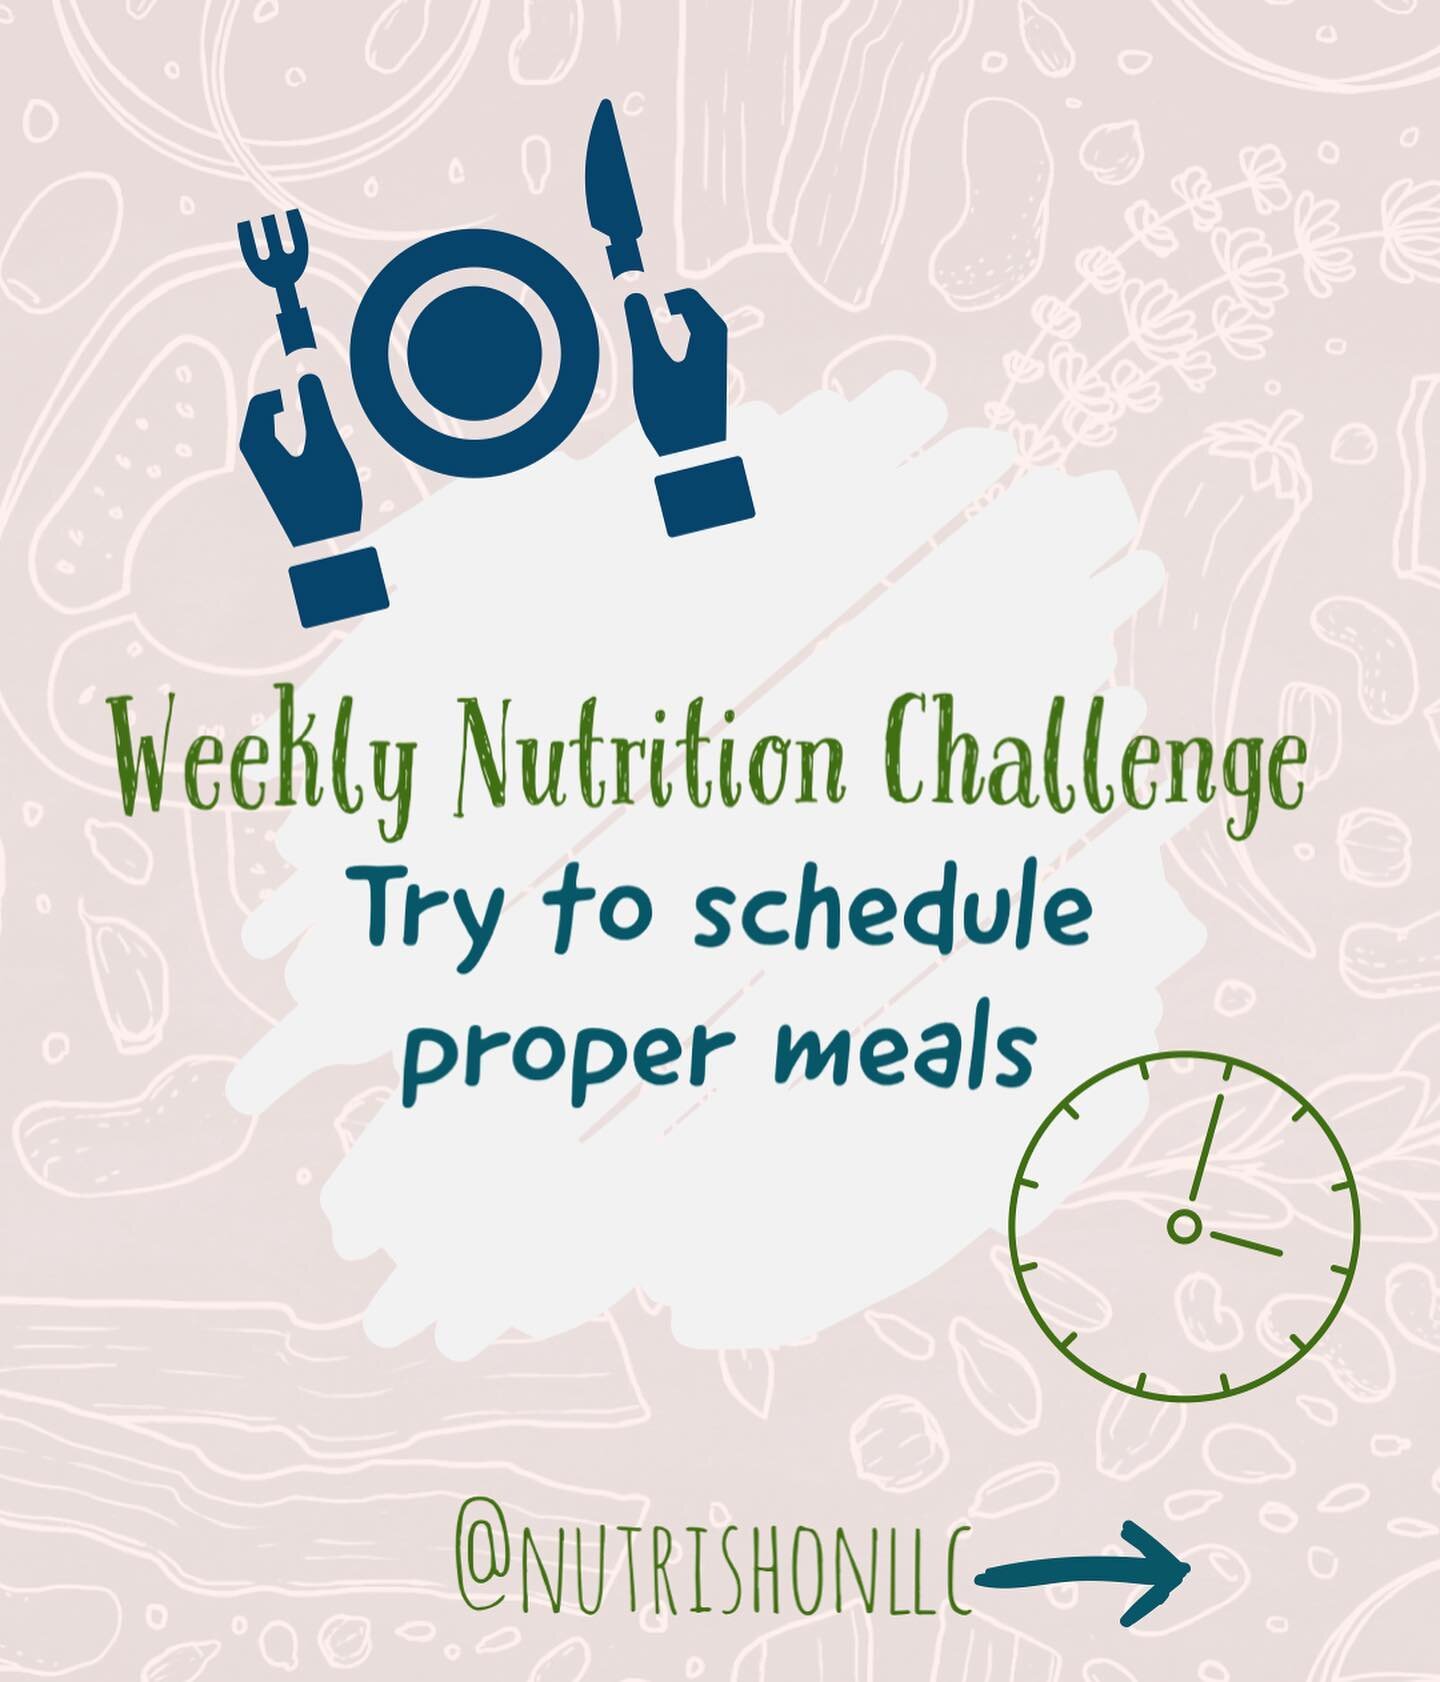 &ldquo;❤️&rdquo; this post to accept the challenge!

Breakfast, lunch, dinner, oh my! Many of us lead very busy schedules and often times winds up only having time for one or two meals and find ourselves grazing on a variety of snacks throughout the 